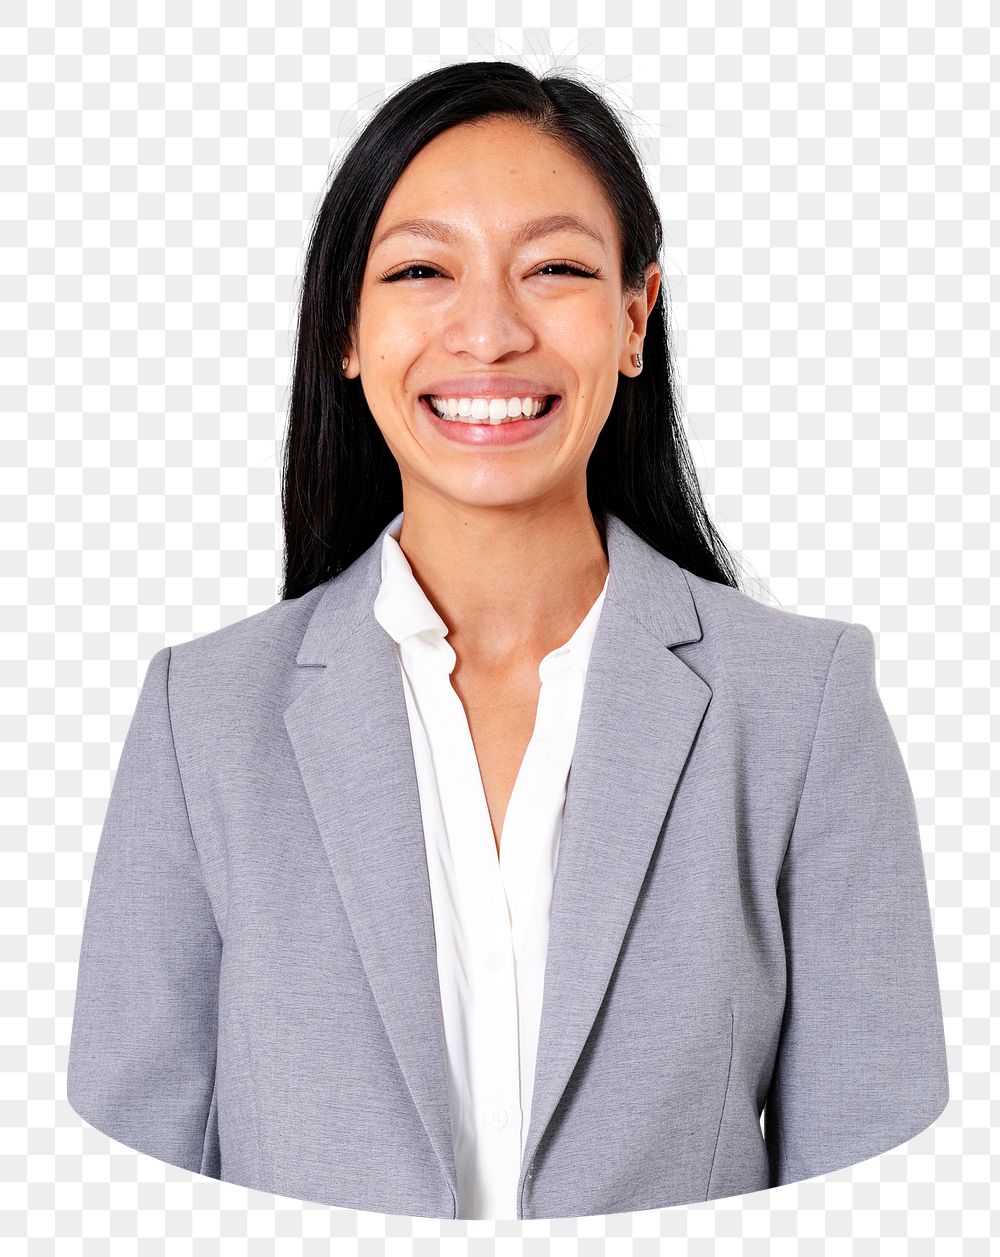 Asian businesswoman smiling png sticker, transparent background png sticker, transparent background